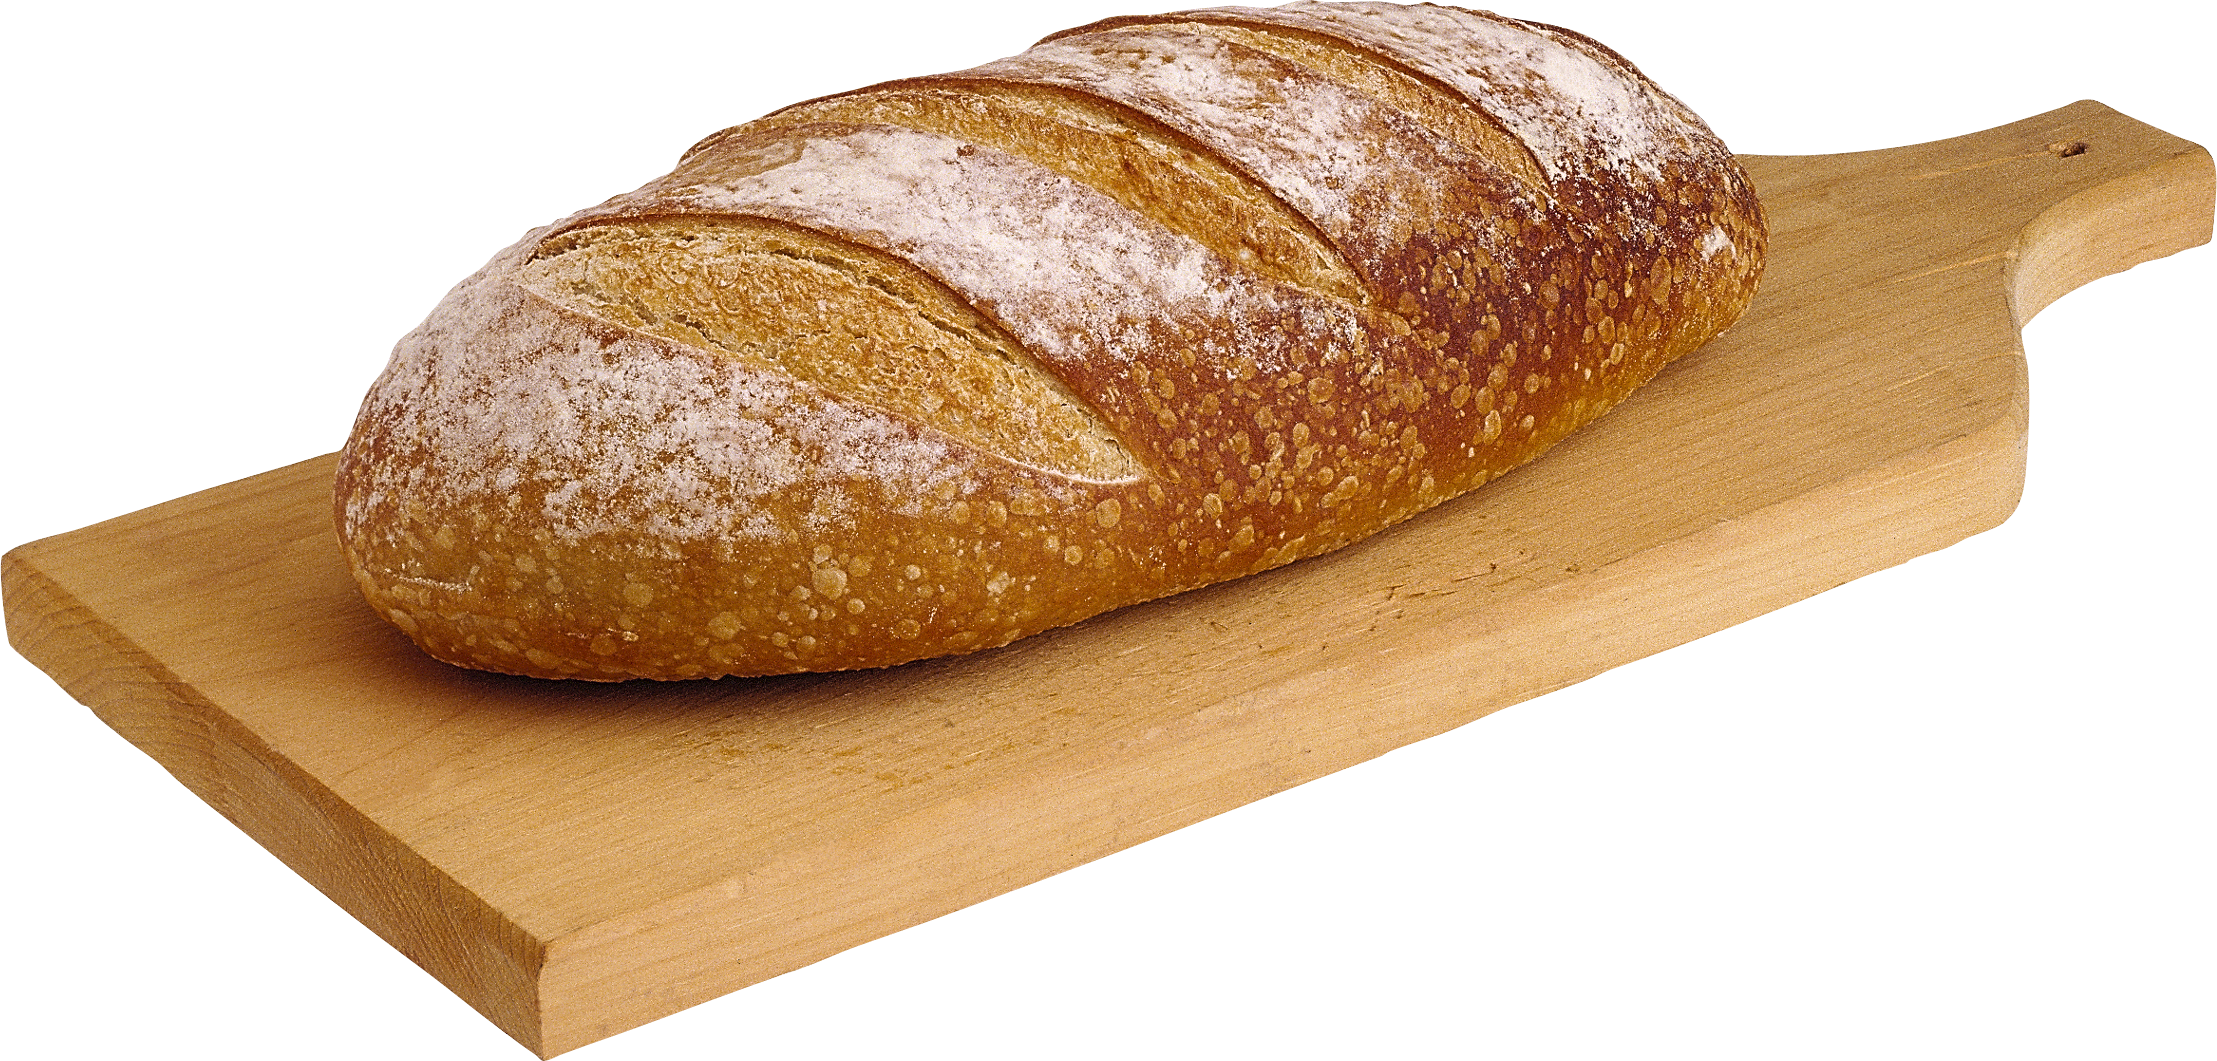 Italian Bread Png Transparent Image - Bread Images, Transparent background PNG HD thumbnail